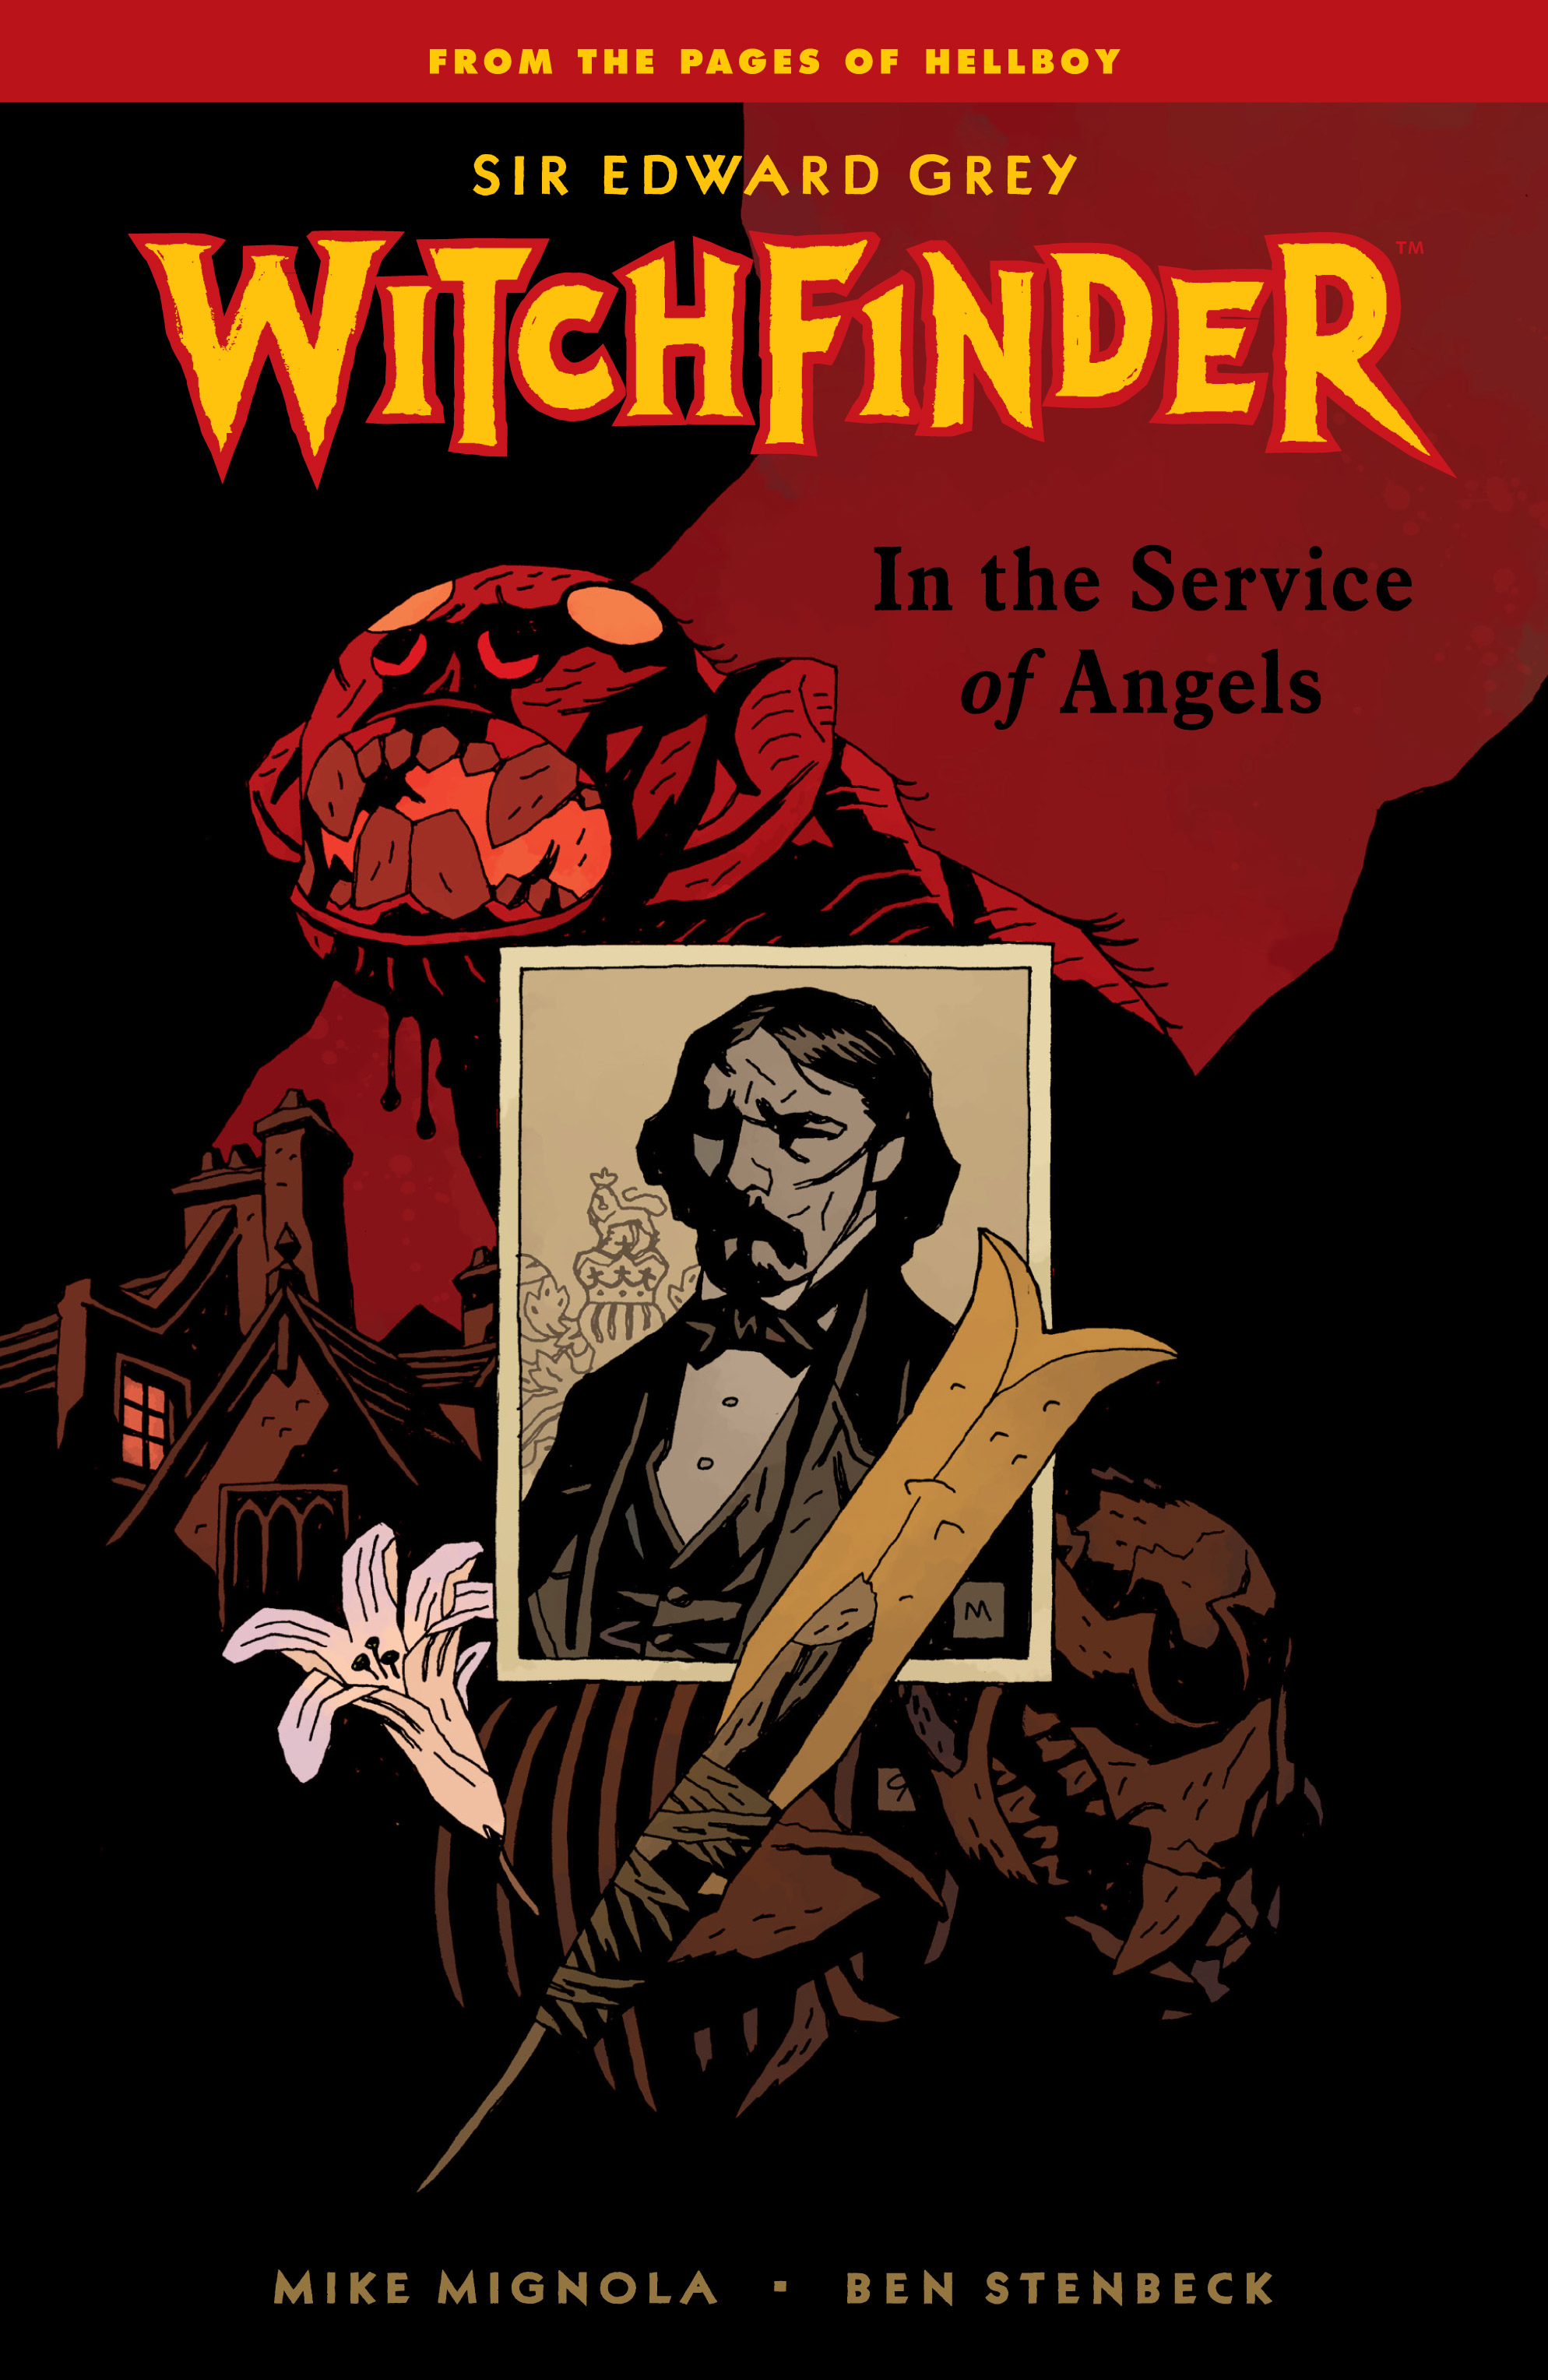 Read online Sir Edward Grey, Witchfinder: In the Service of Angels comic -  Issue # TPB - 1